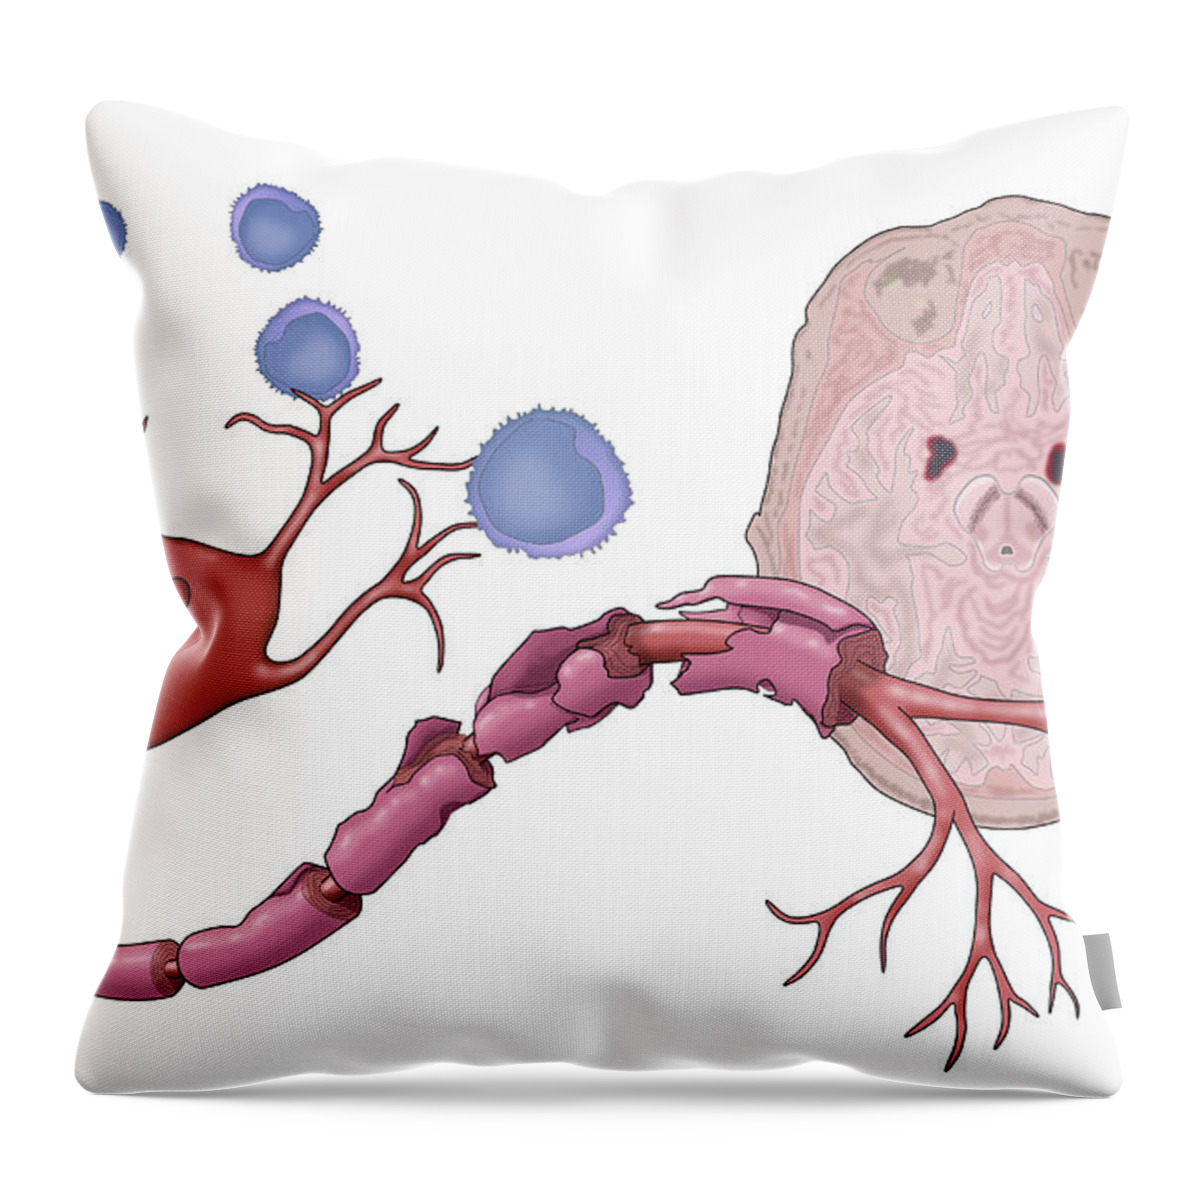 Anatomy Throw Pillow featuring the photograph Multiple Sclerosis #4 by Monica Schroeder